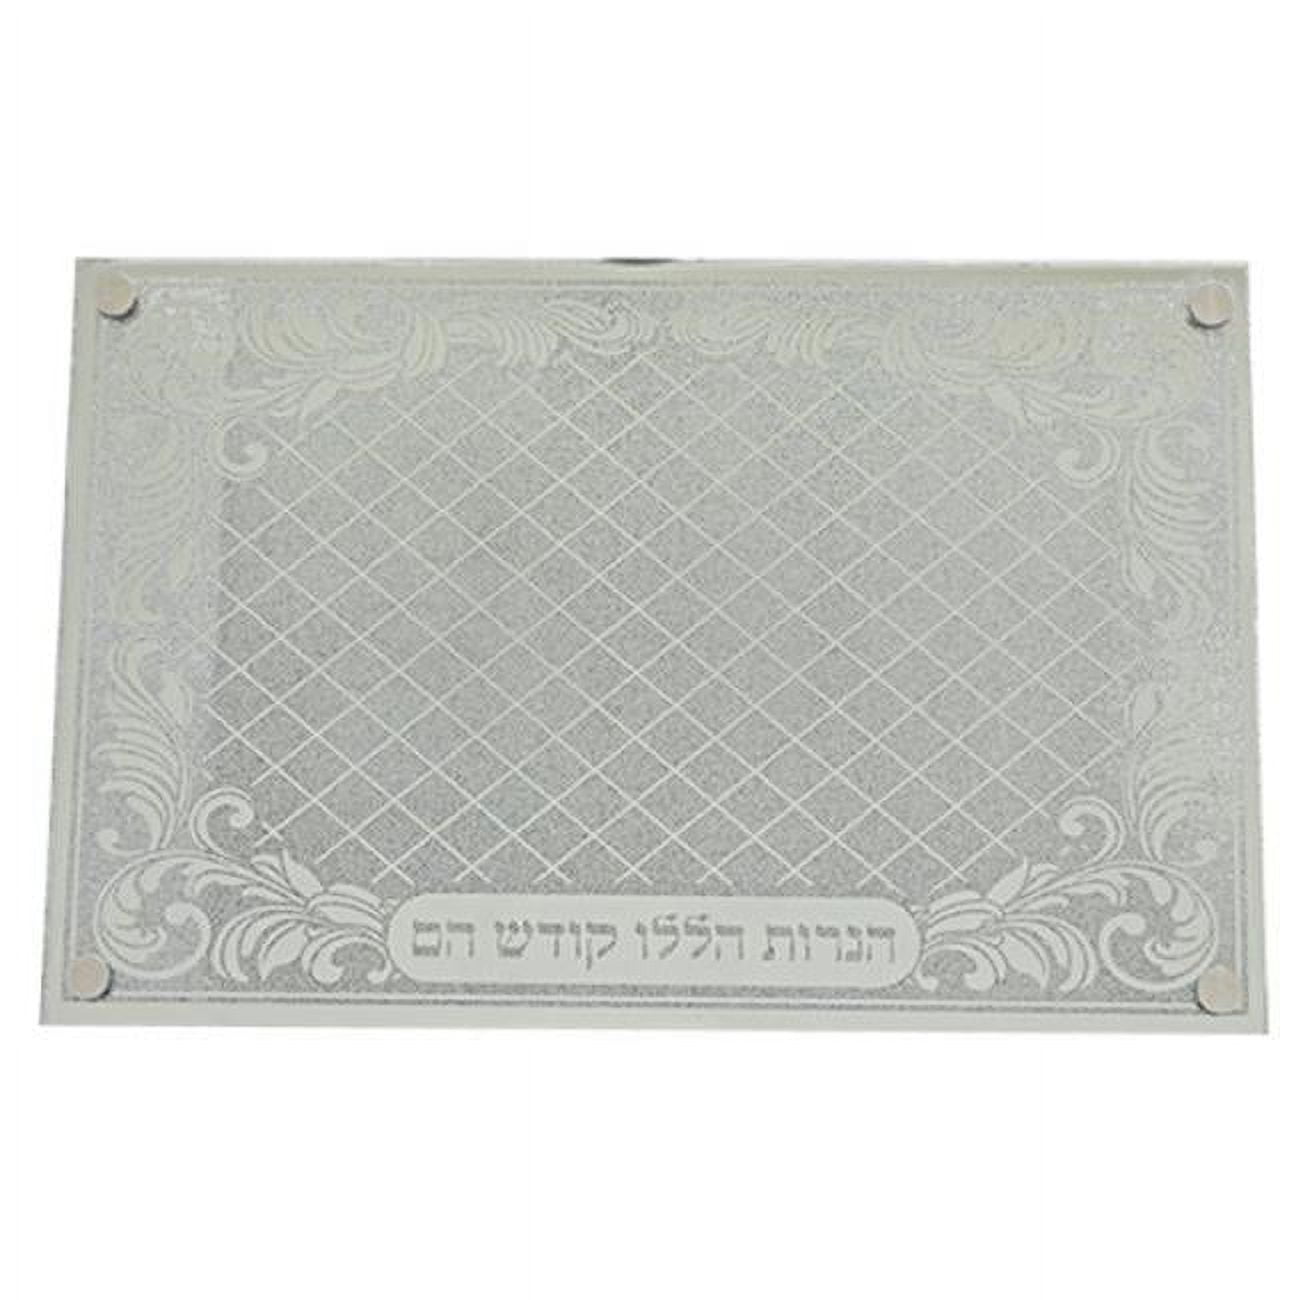 Picture of Art Judaica 58148 9 x 13.75 in. Glass Mirror Tray for Menorah